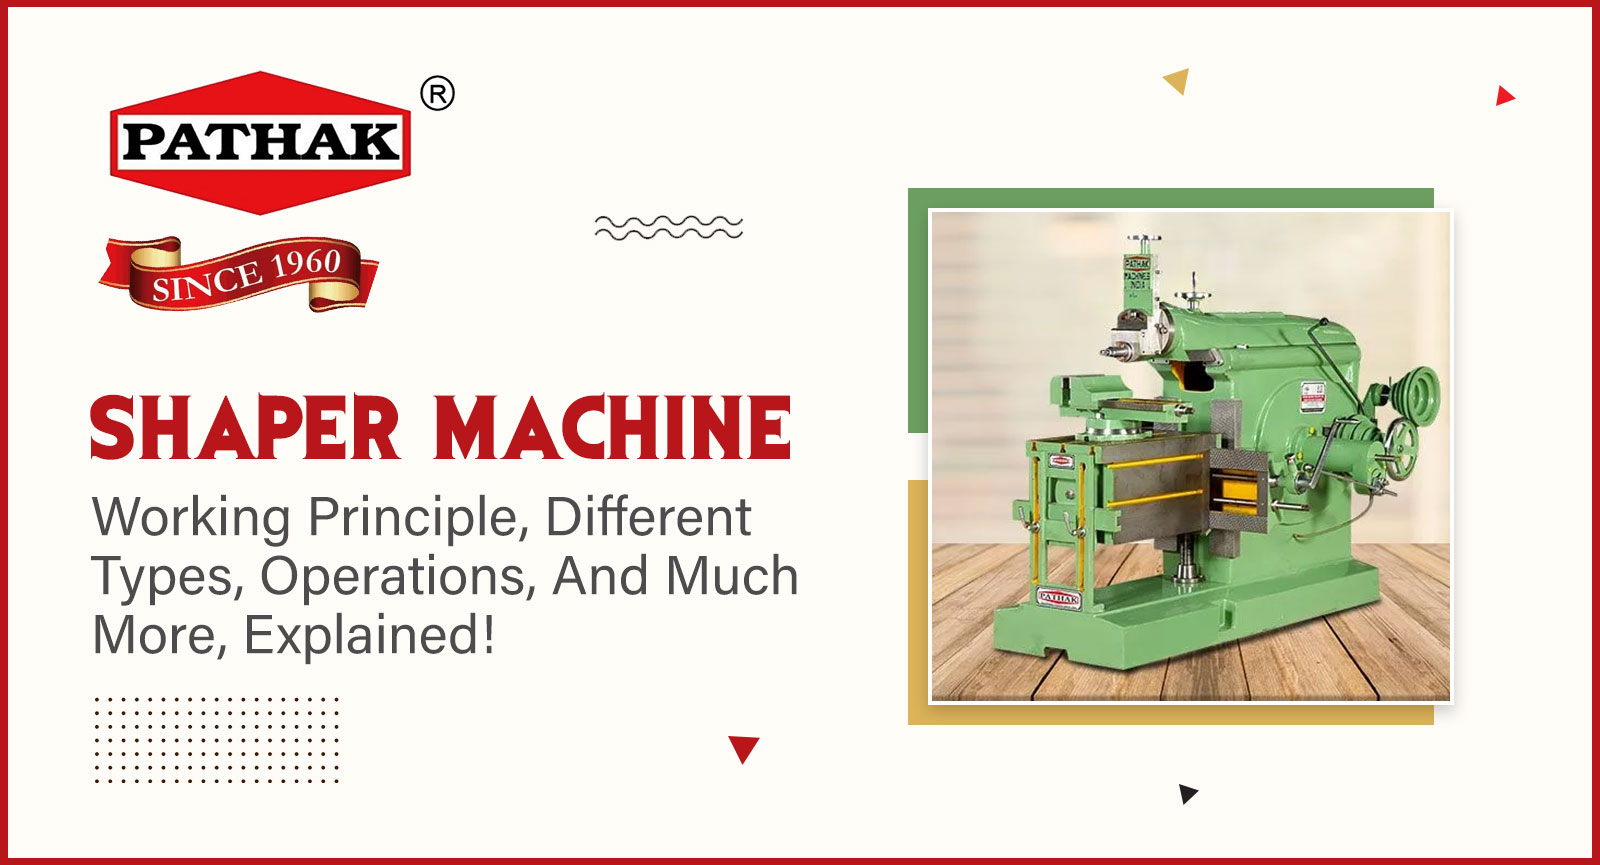 shaper machine - Wiki, introduction, types, history, information